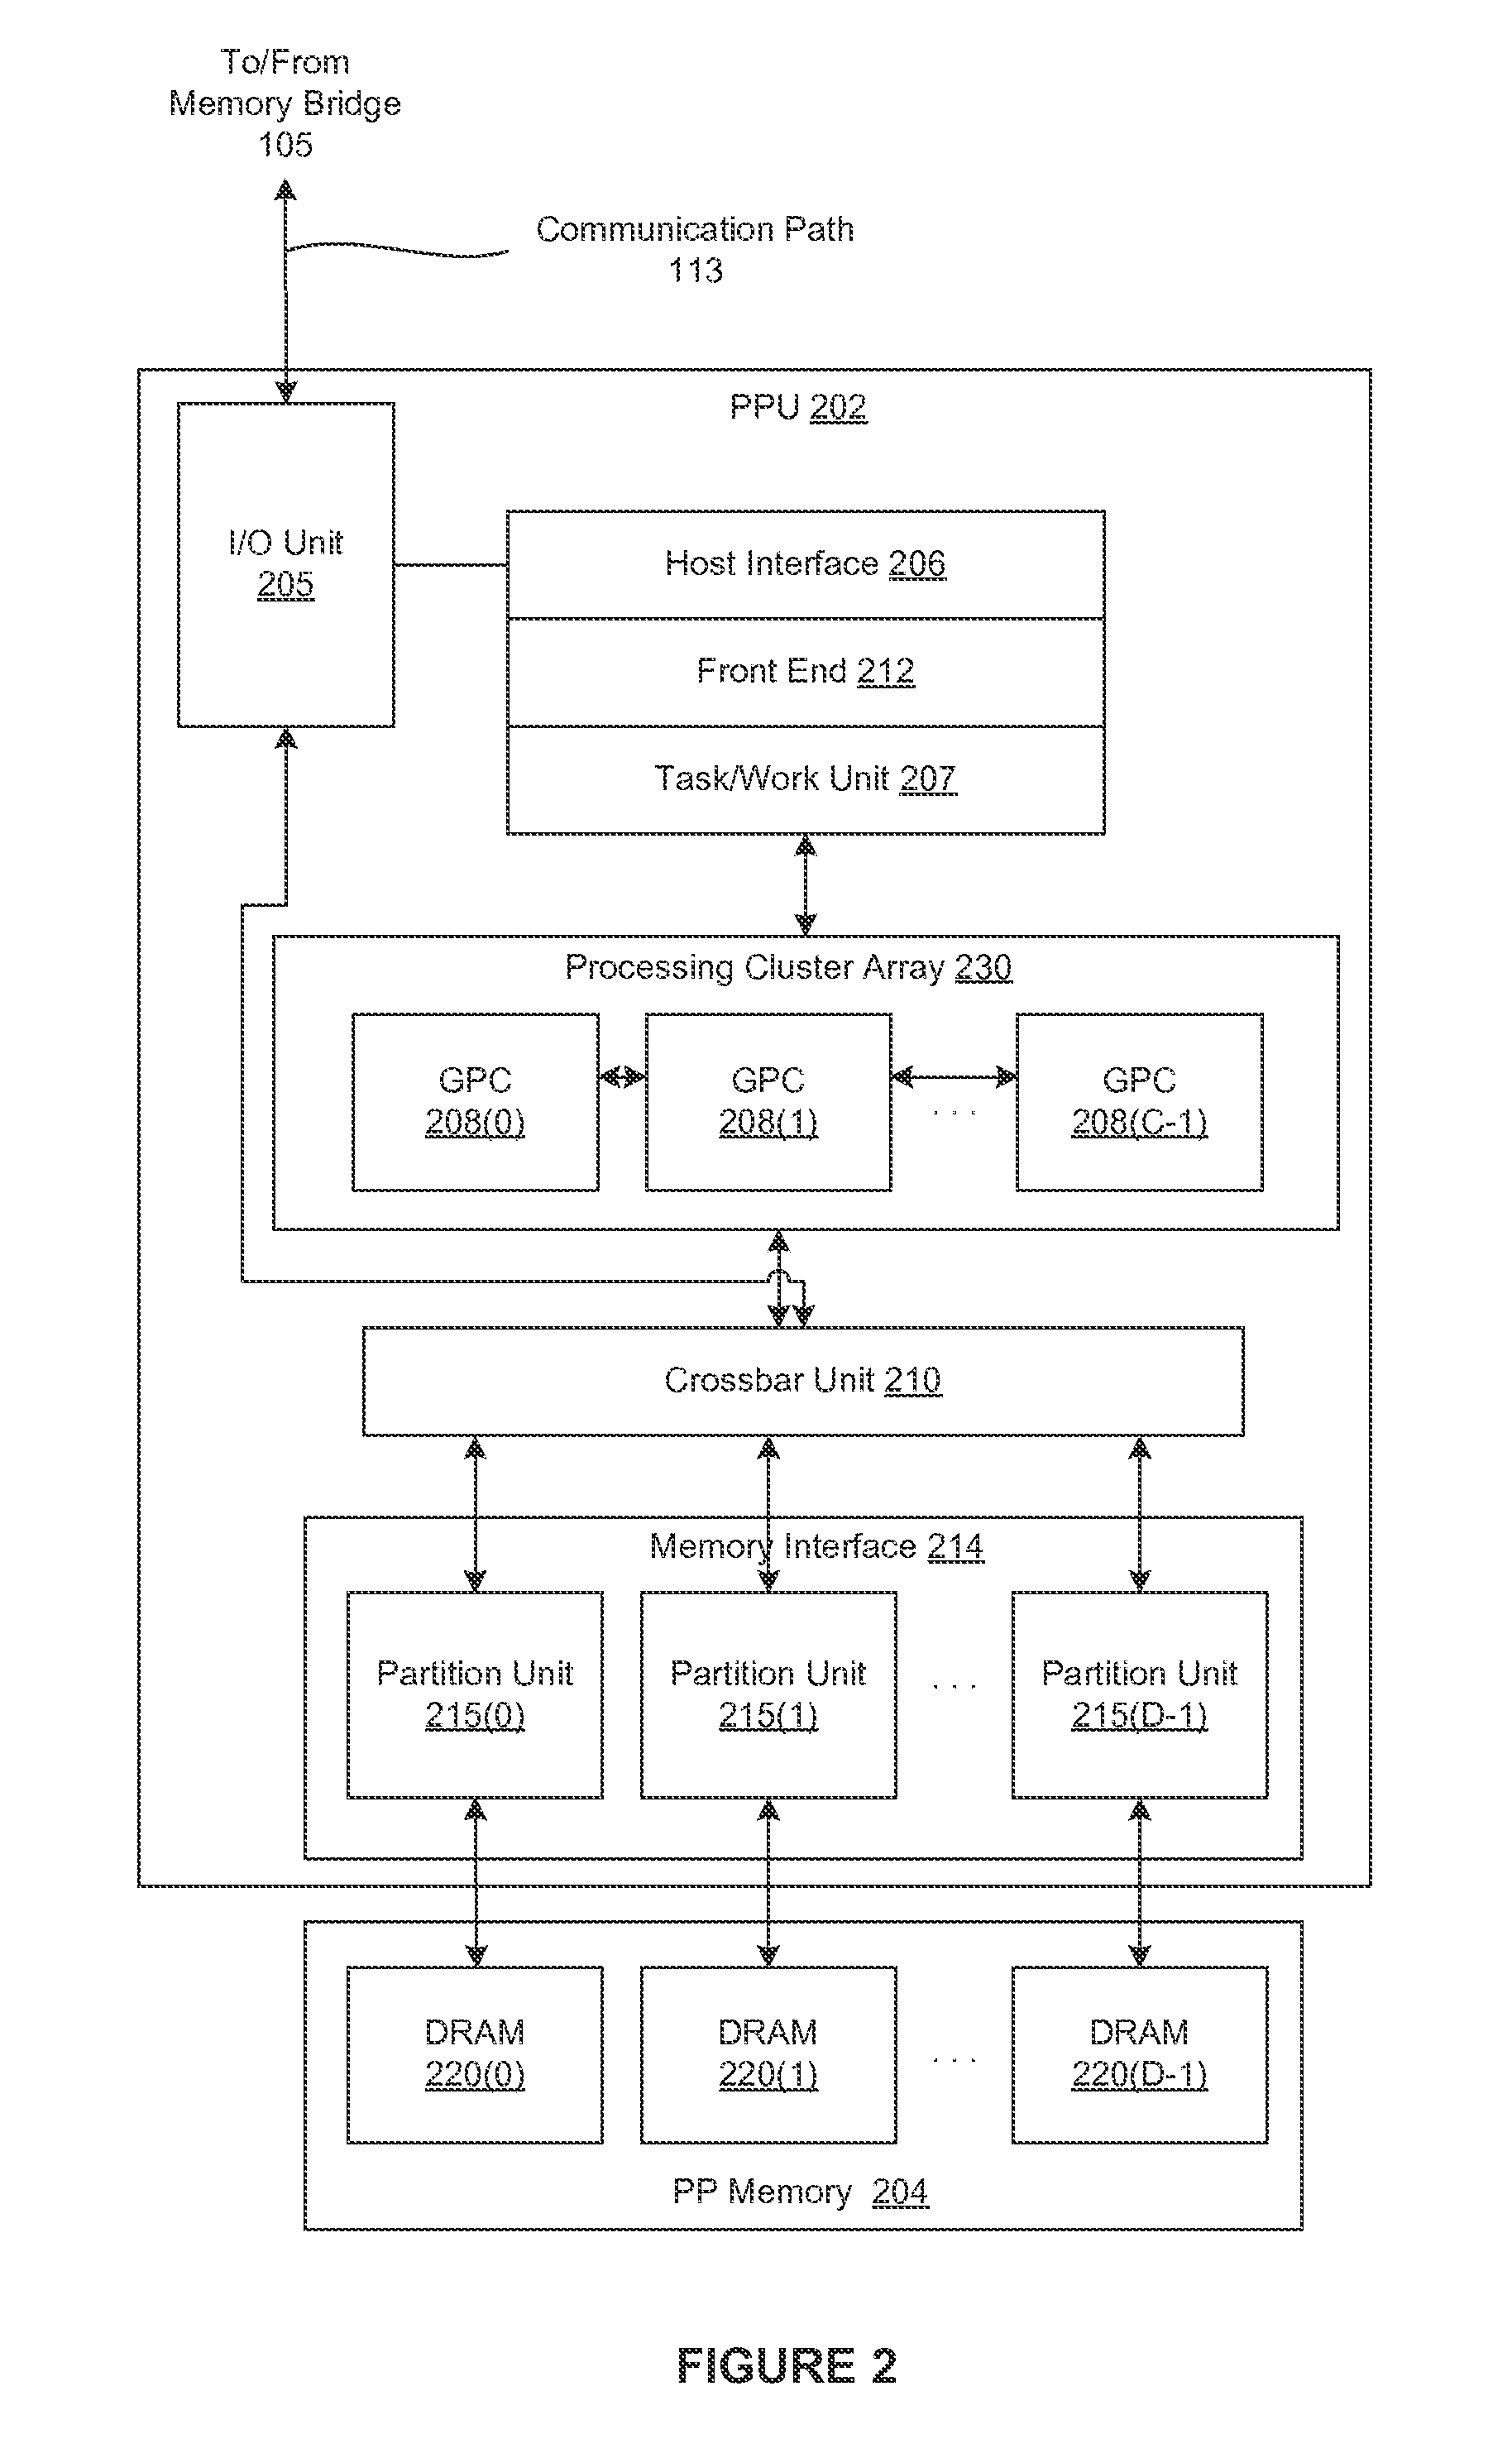 Indirectly accessing sample data to perform multi-convolution operations in a parallel processing system